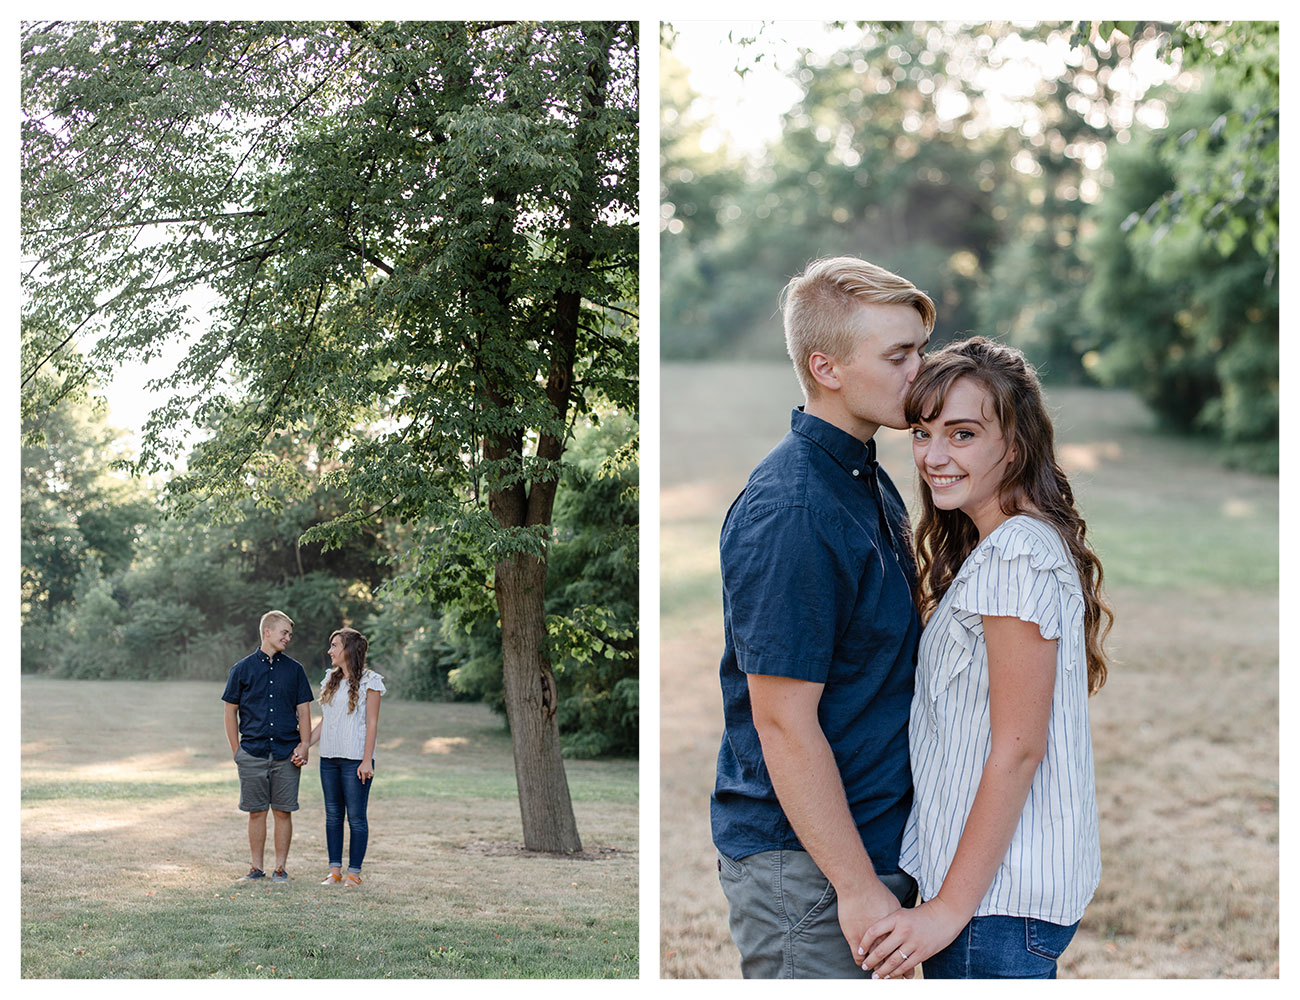 Penfield NY Summer Engagement Session | Cody & Naomi